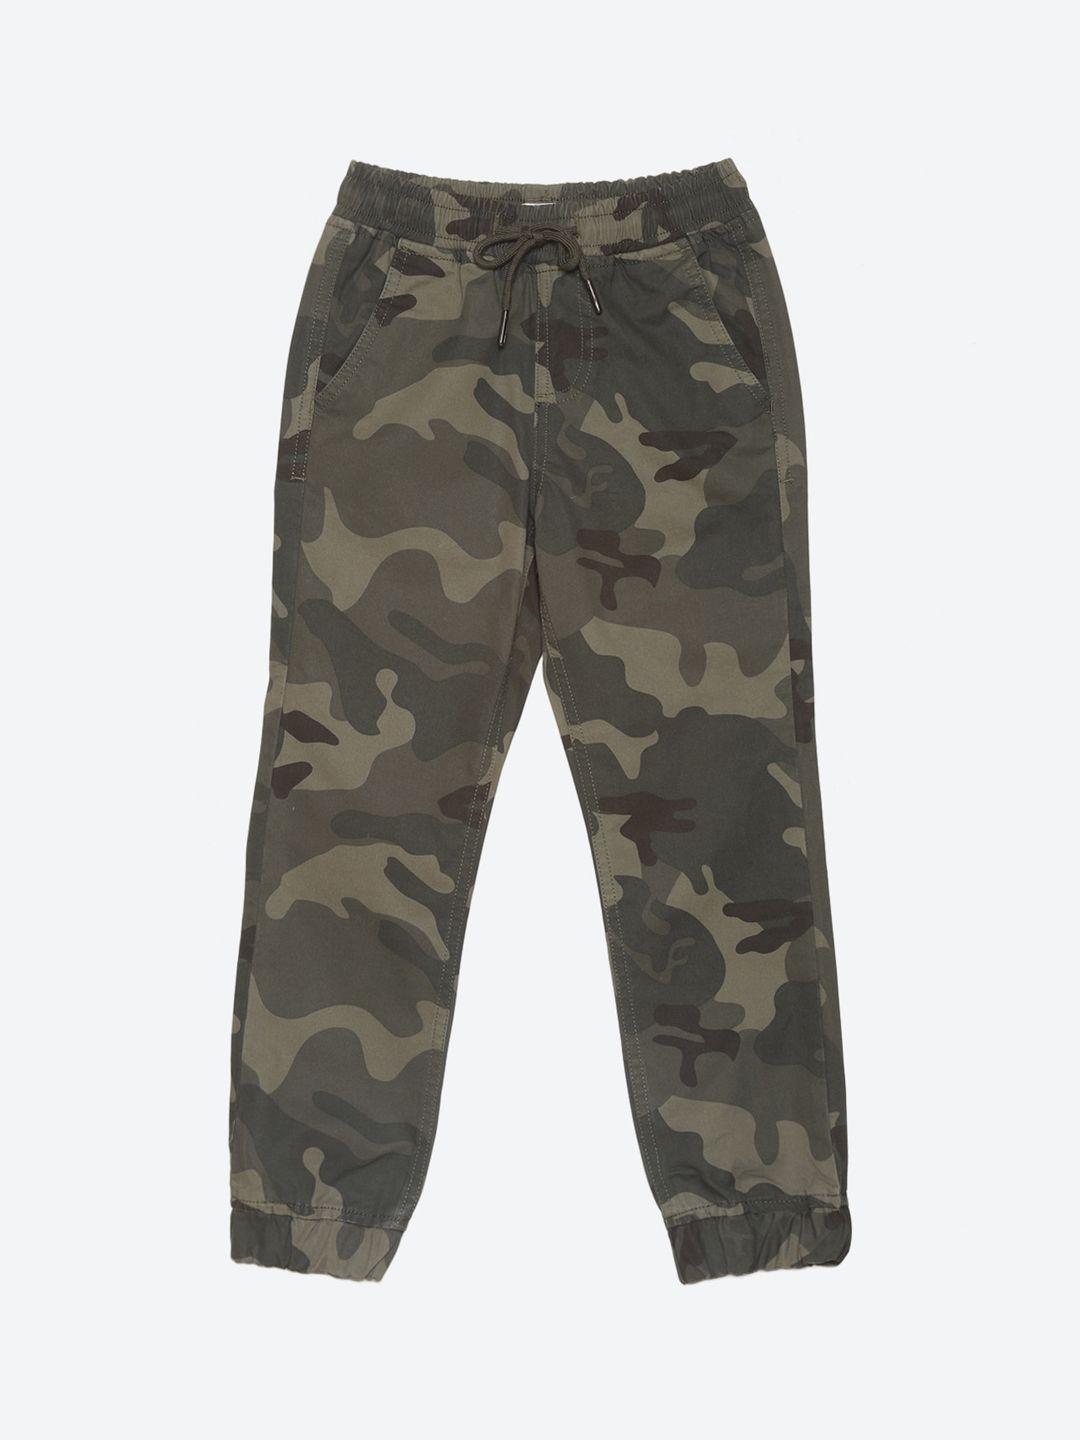 2bme boys camouflage printed cotton joggers